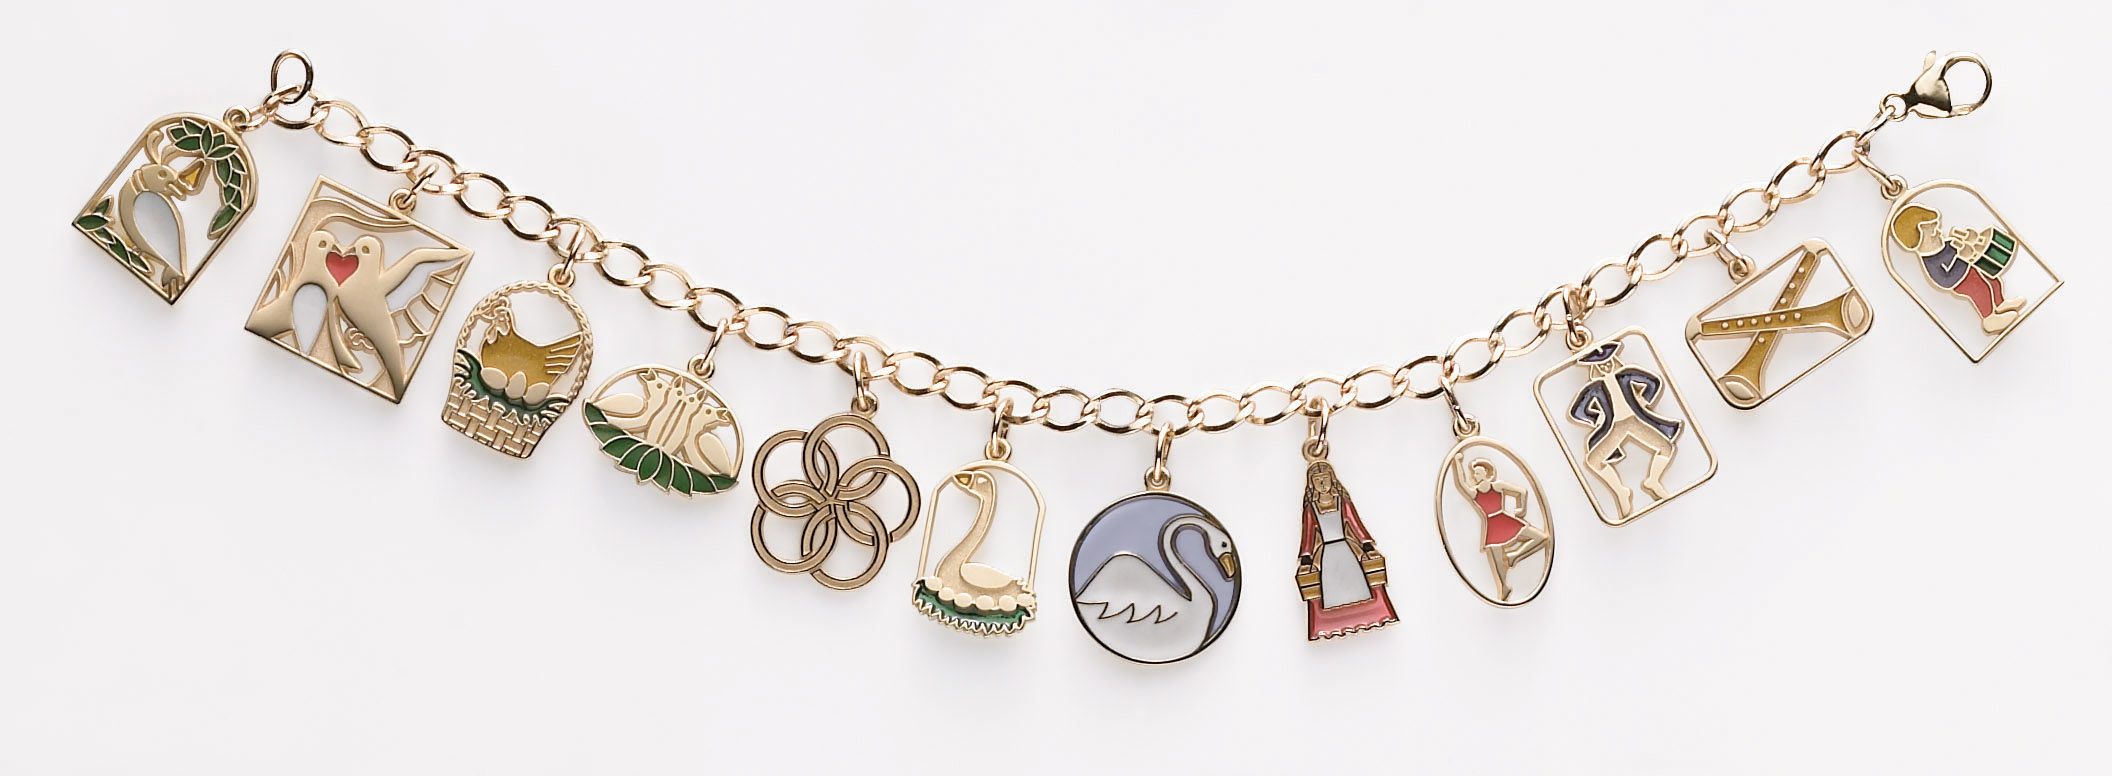 Add a Little Jingle to Your Wrist with Rembrandt's 12 Days of Christmas Charm Bracelet